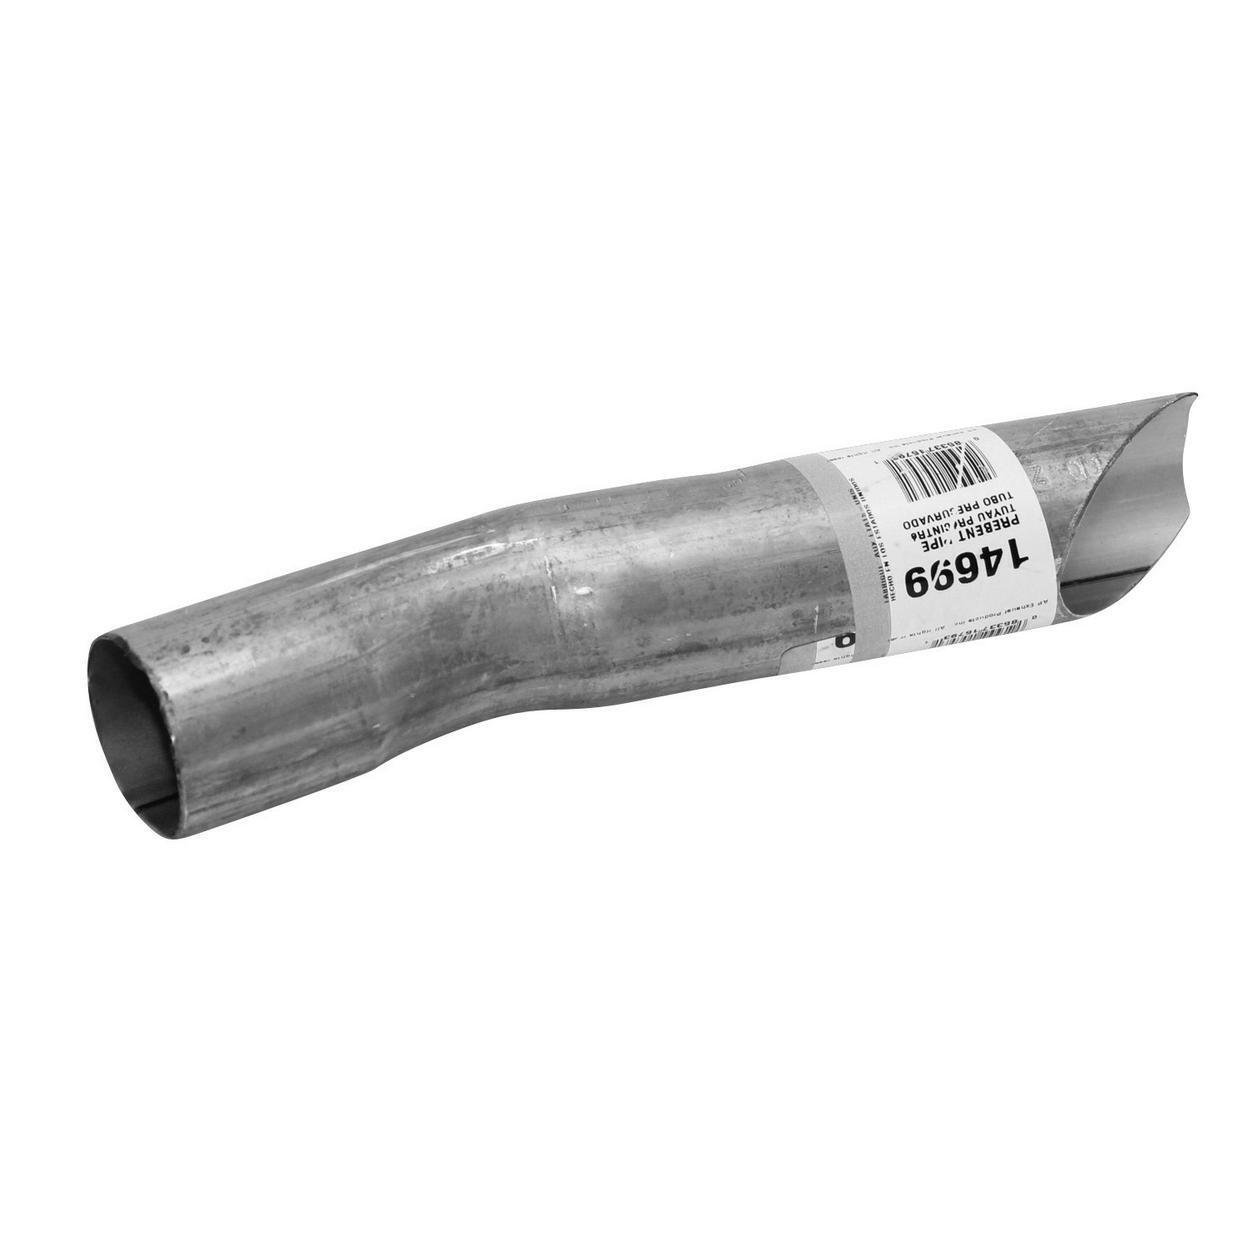 14699-BS Exhaust Tail Pipe Fits 1995-1996 Chevrolet Corsica 3.1L V6 GAS OHV